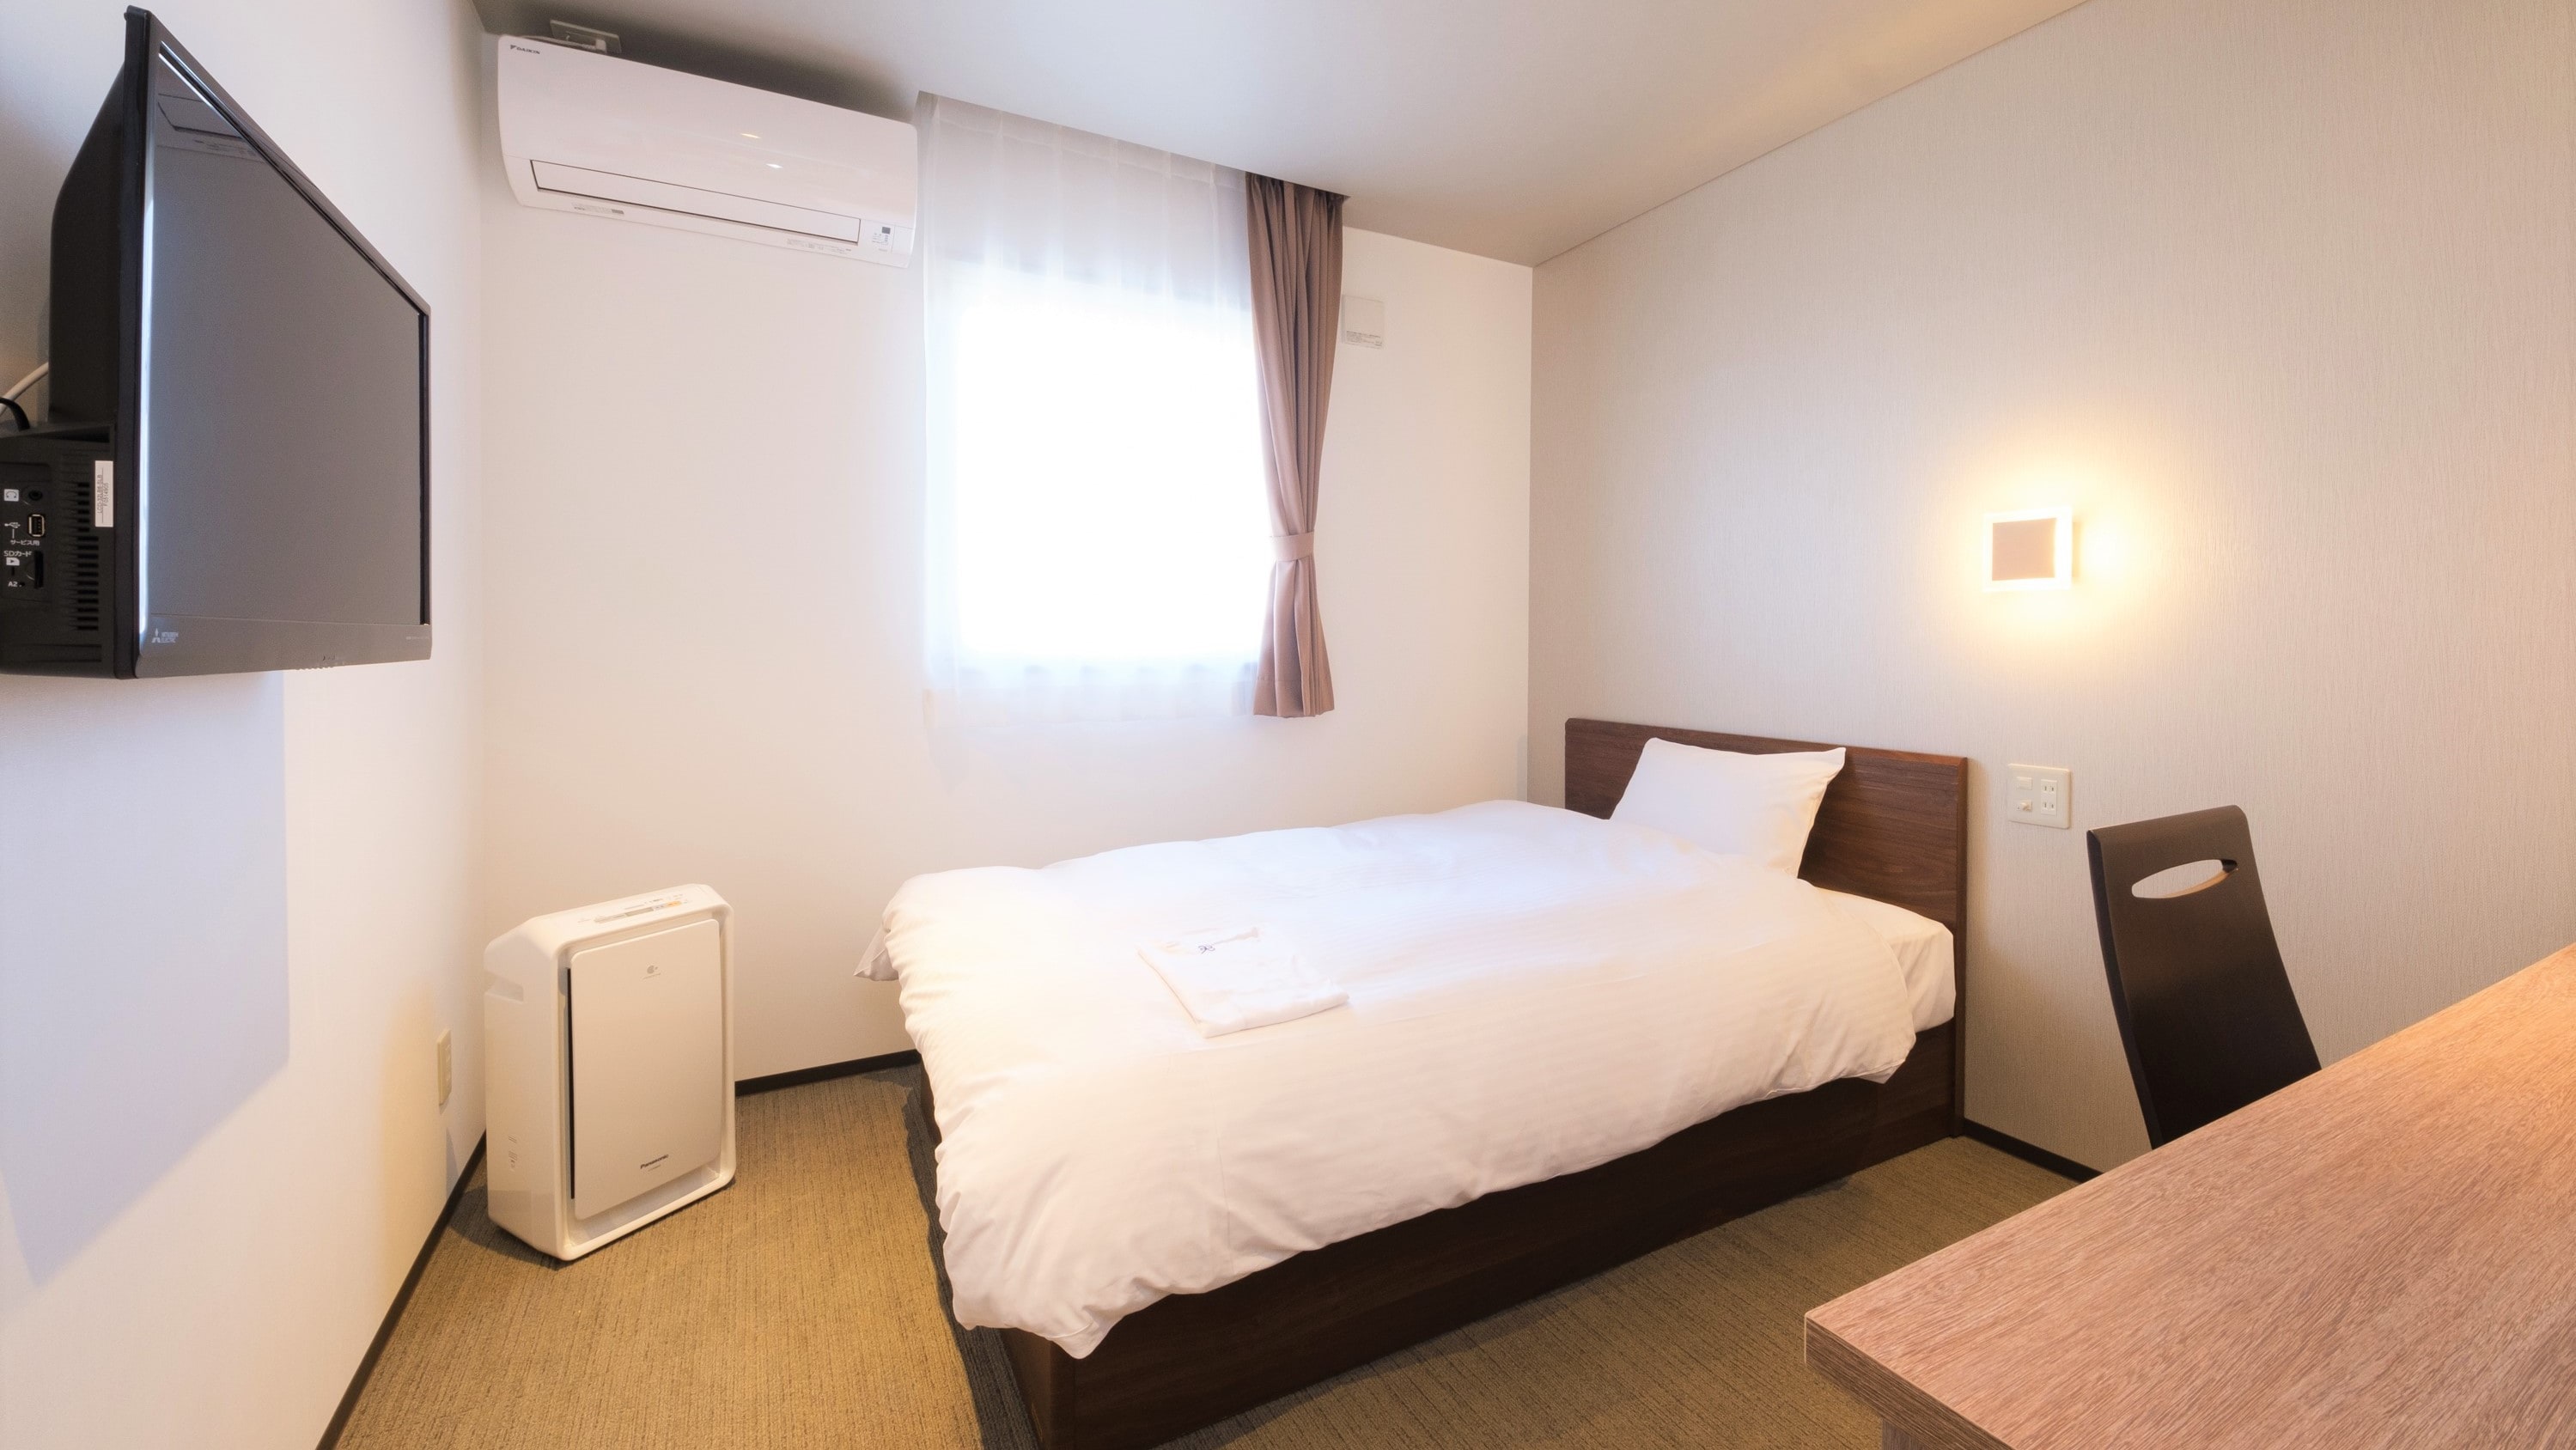 [Single room] 14.1 square meters WiFi / TV / air purifier complete ◎ For one person, business trip or business use ◎